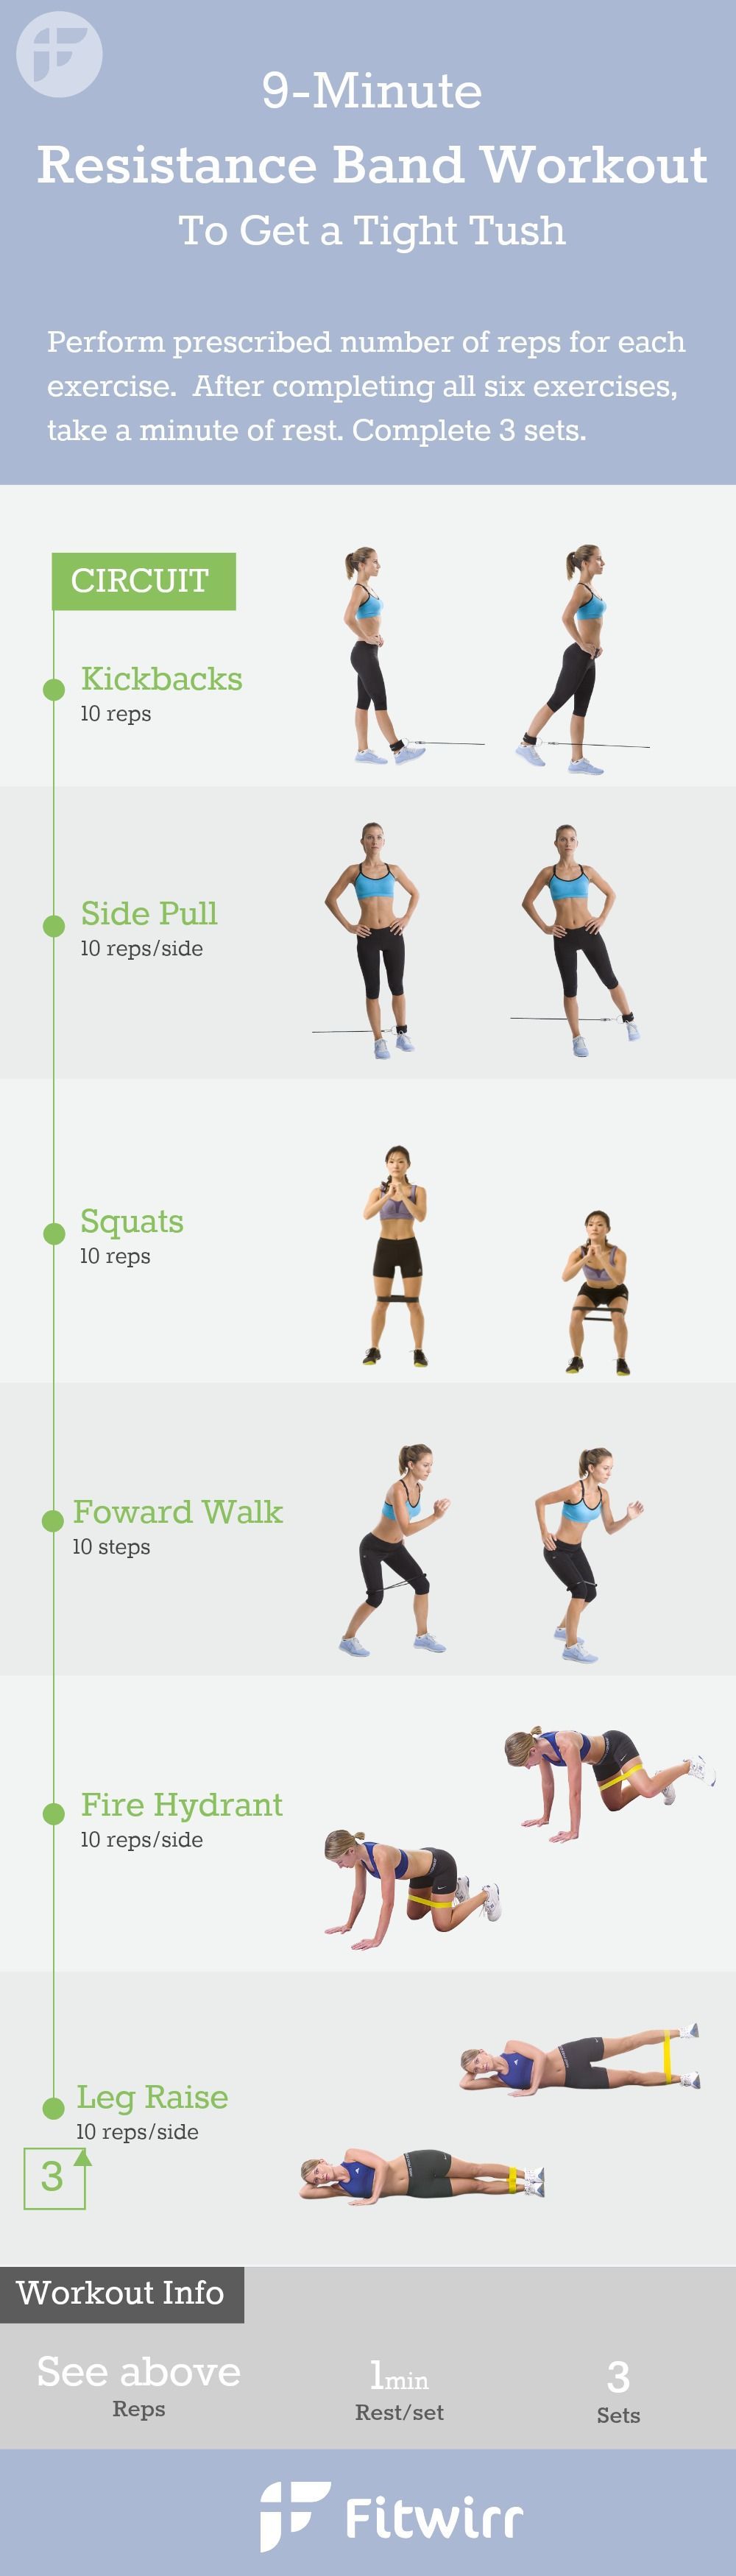 9-Minute Resistance Band Exercises for women. You don’t have to lift heavy dumbbells or a medicine ball to get a great workout at